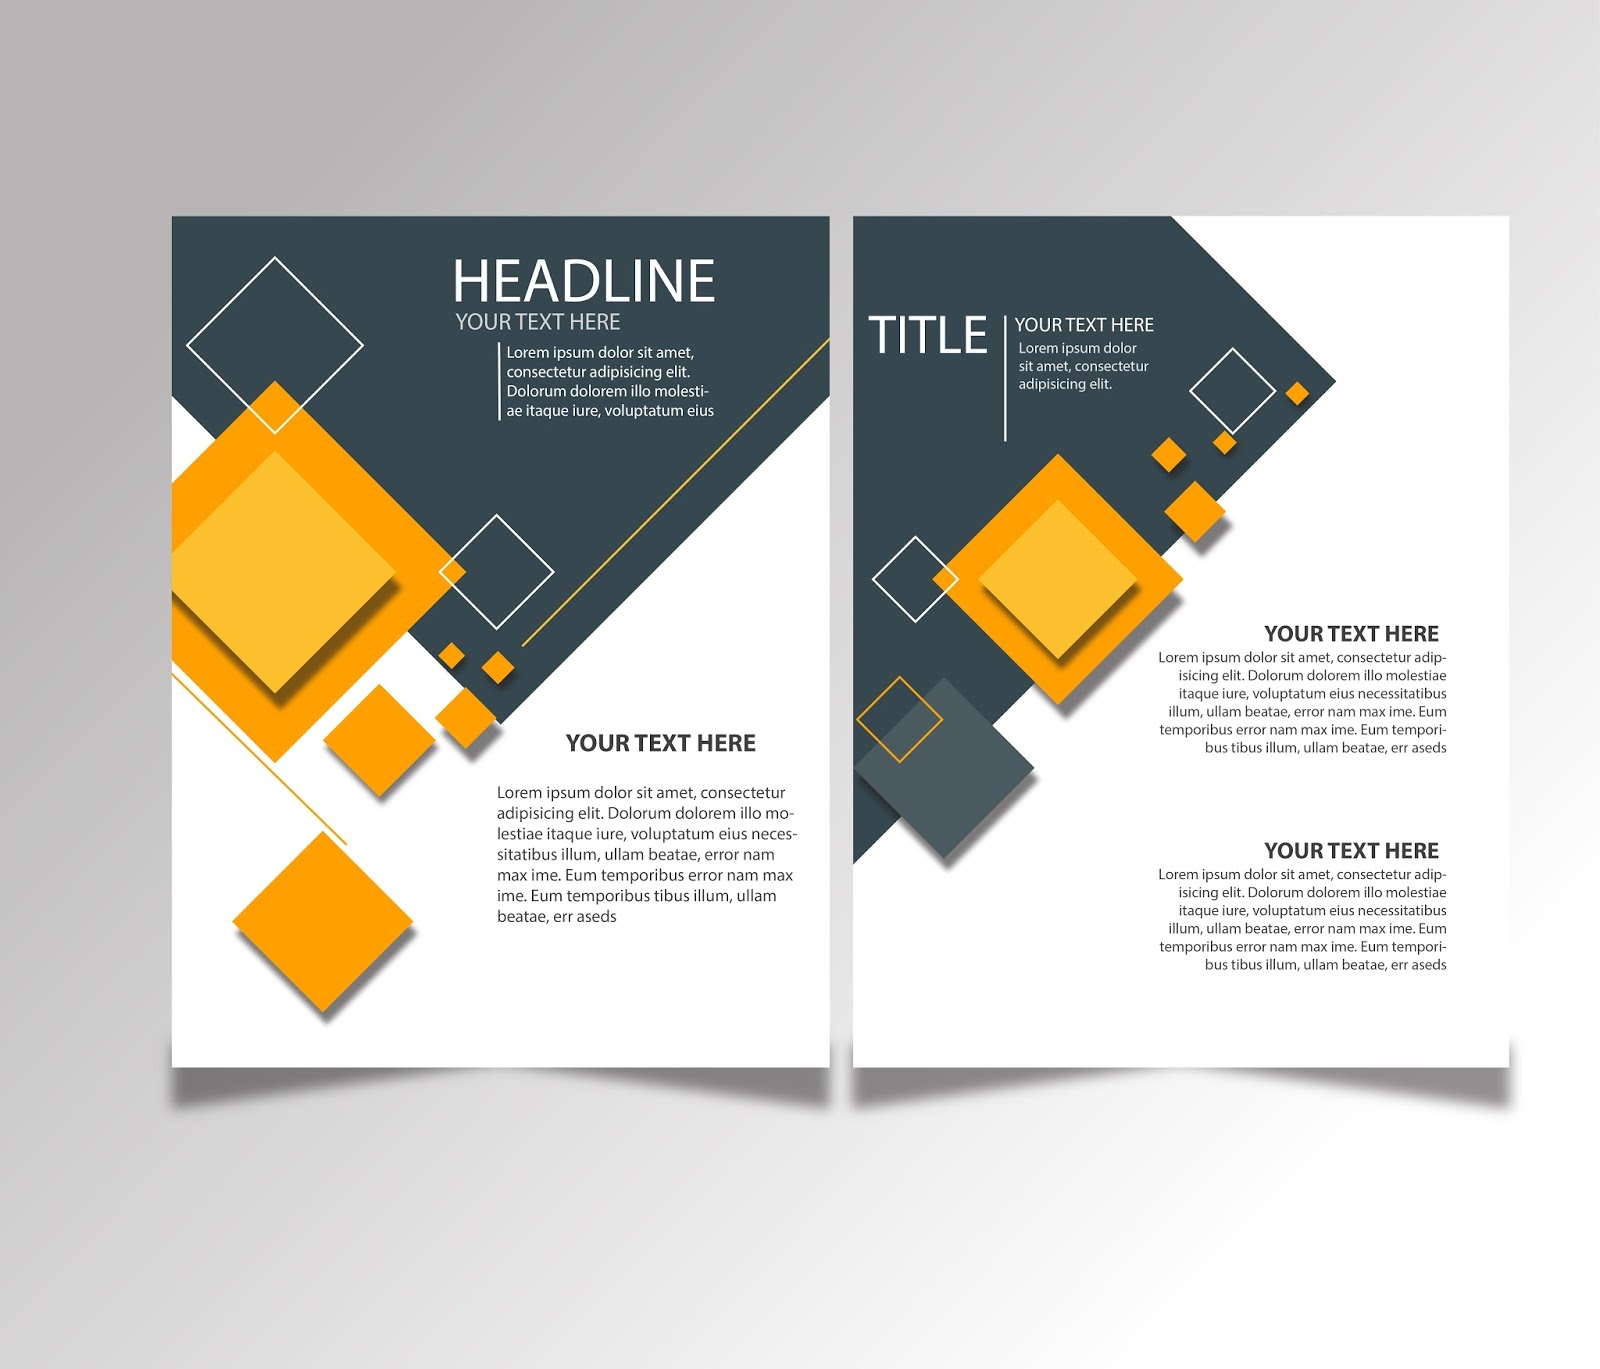 FREE DOWNLOAD BROCHURE DESIGN TEMPLATES AI FILES - Ideosprocess In Free Illustrator Brochure Templates Download